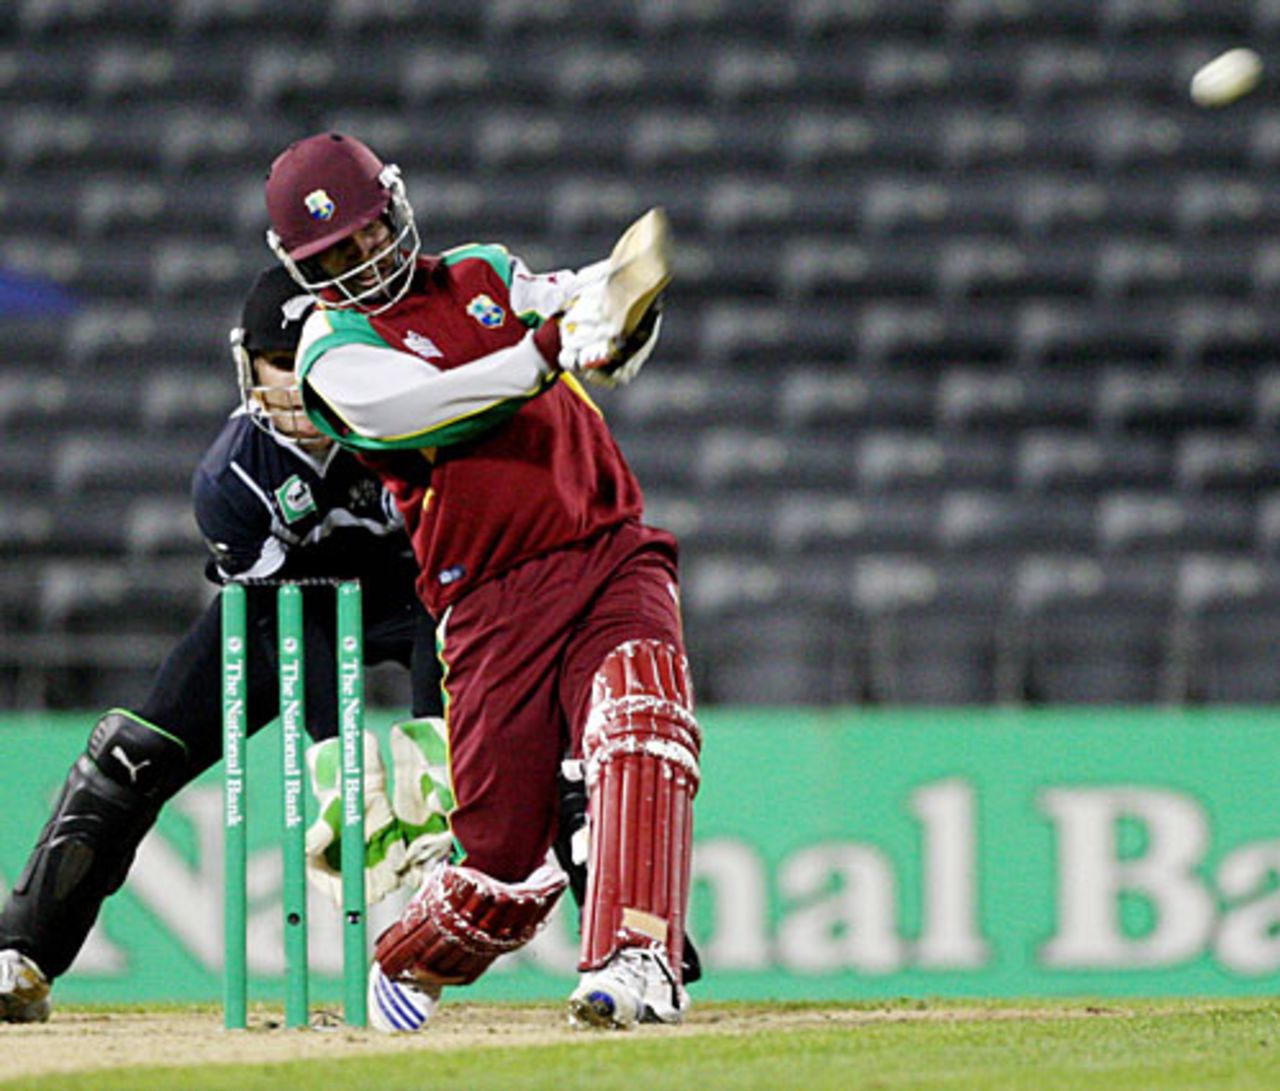 Denesh Ramdin goes for an almighty pull, New Zealand v West Indies, 2nd ODI, Christchurch, January 3, 2009